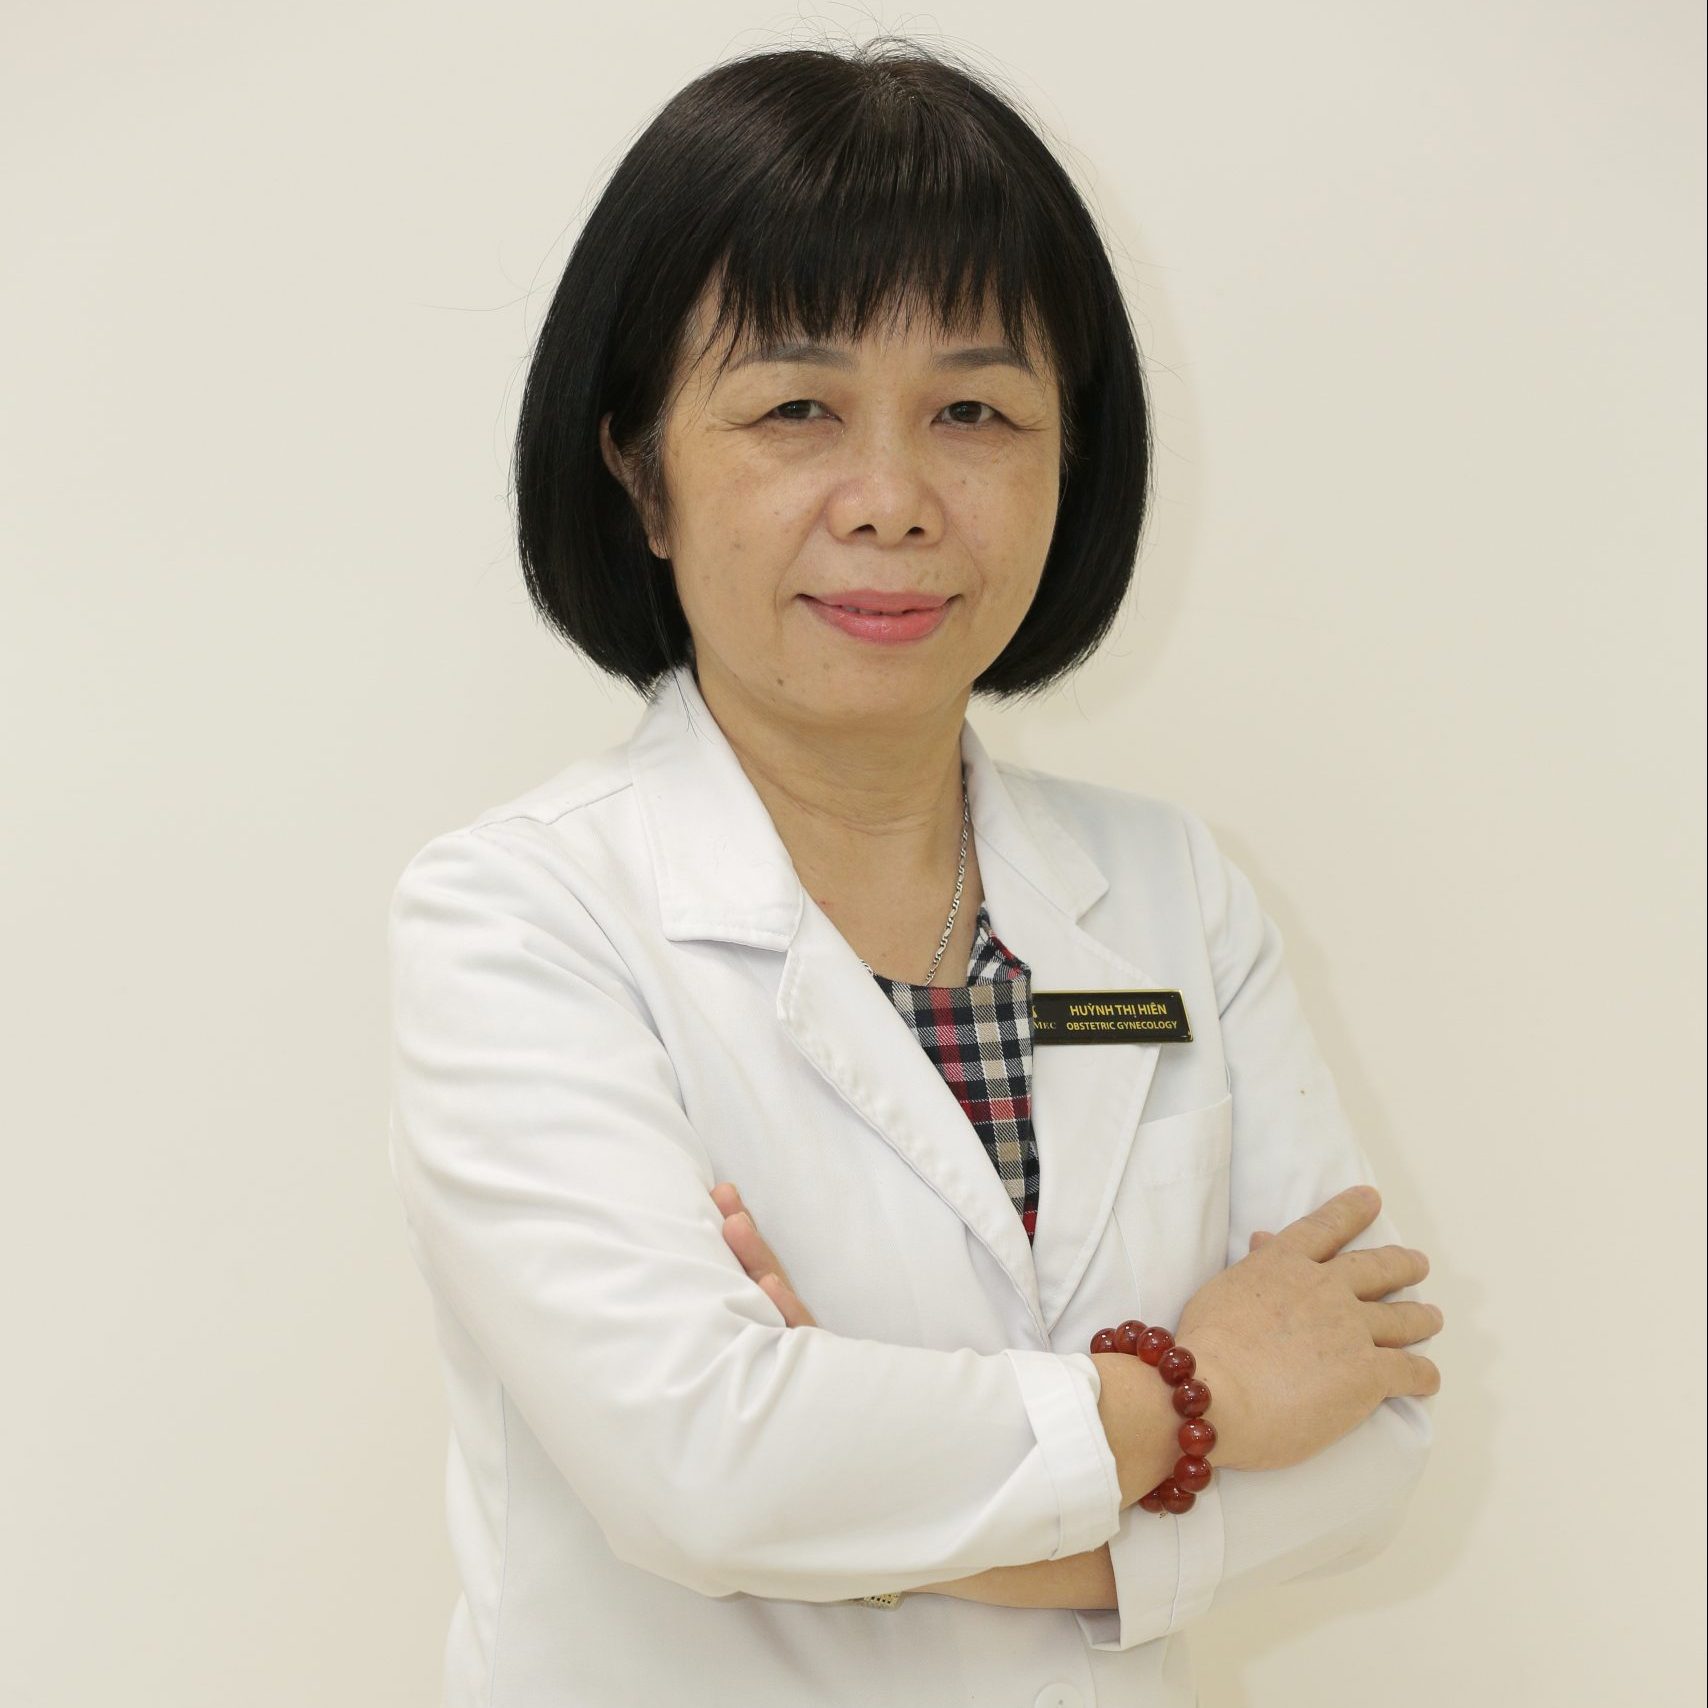 Huynh Thi Hien, MD – SPECIALIST LEVEL II